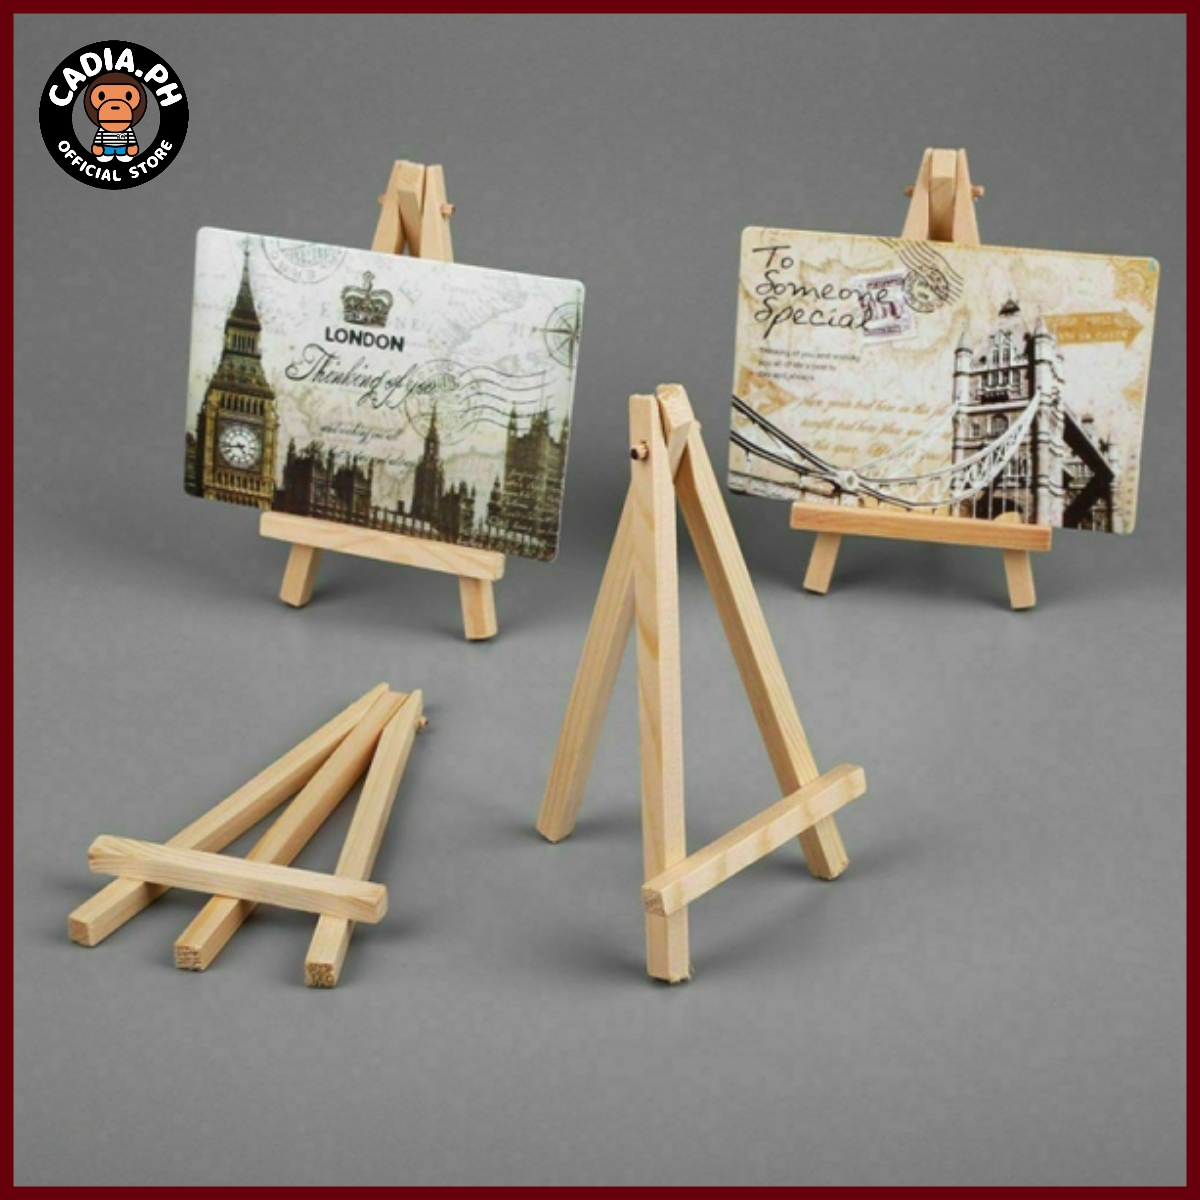 Wooden Picture Frame Stand Solid Wood Small Easel Table Display Menu Holder